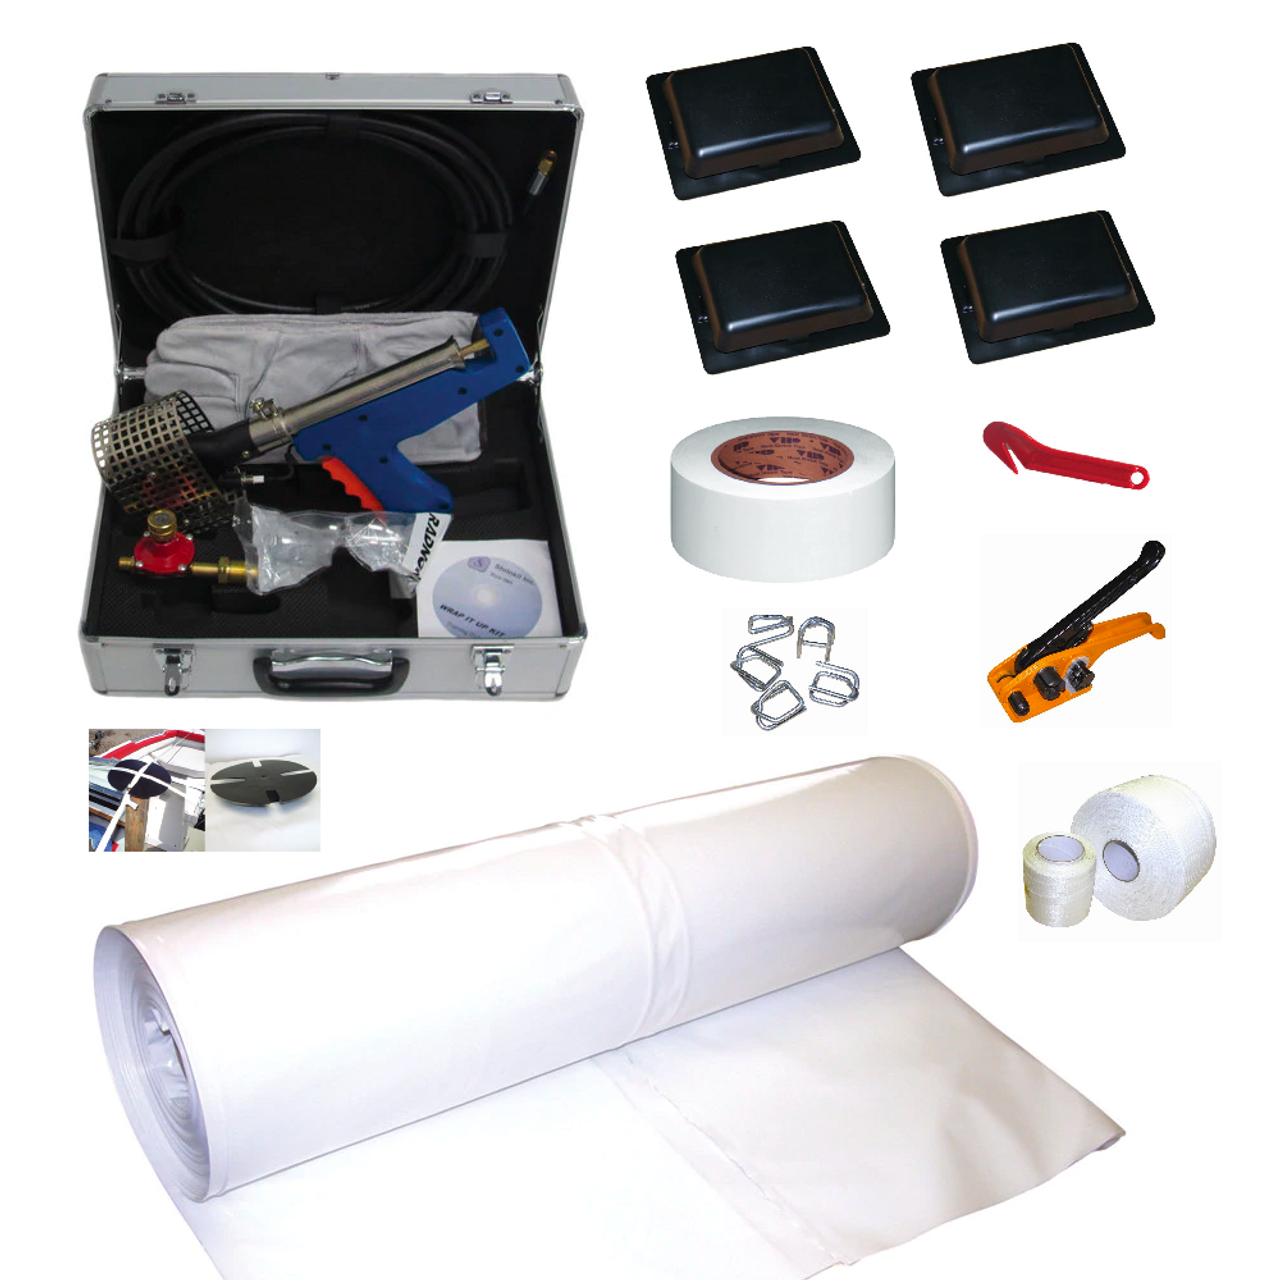 Canvas Snap Kit, 64-Pack by West Marine | Boat Maintenance at West Marine